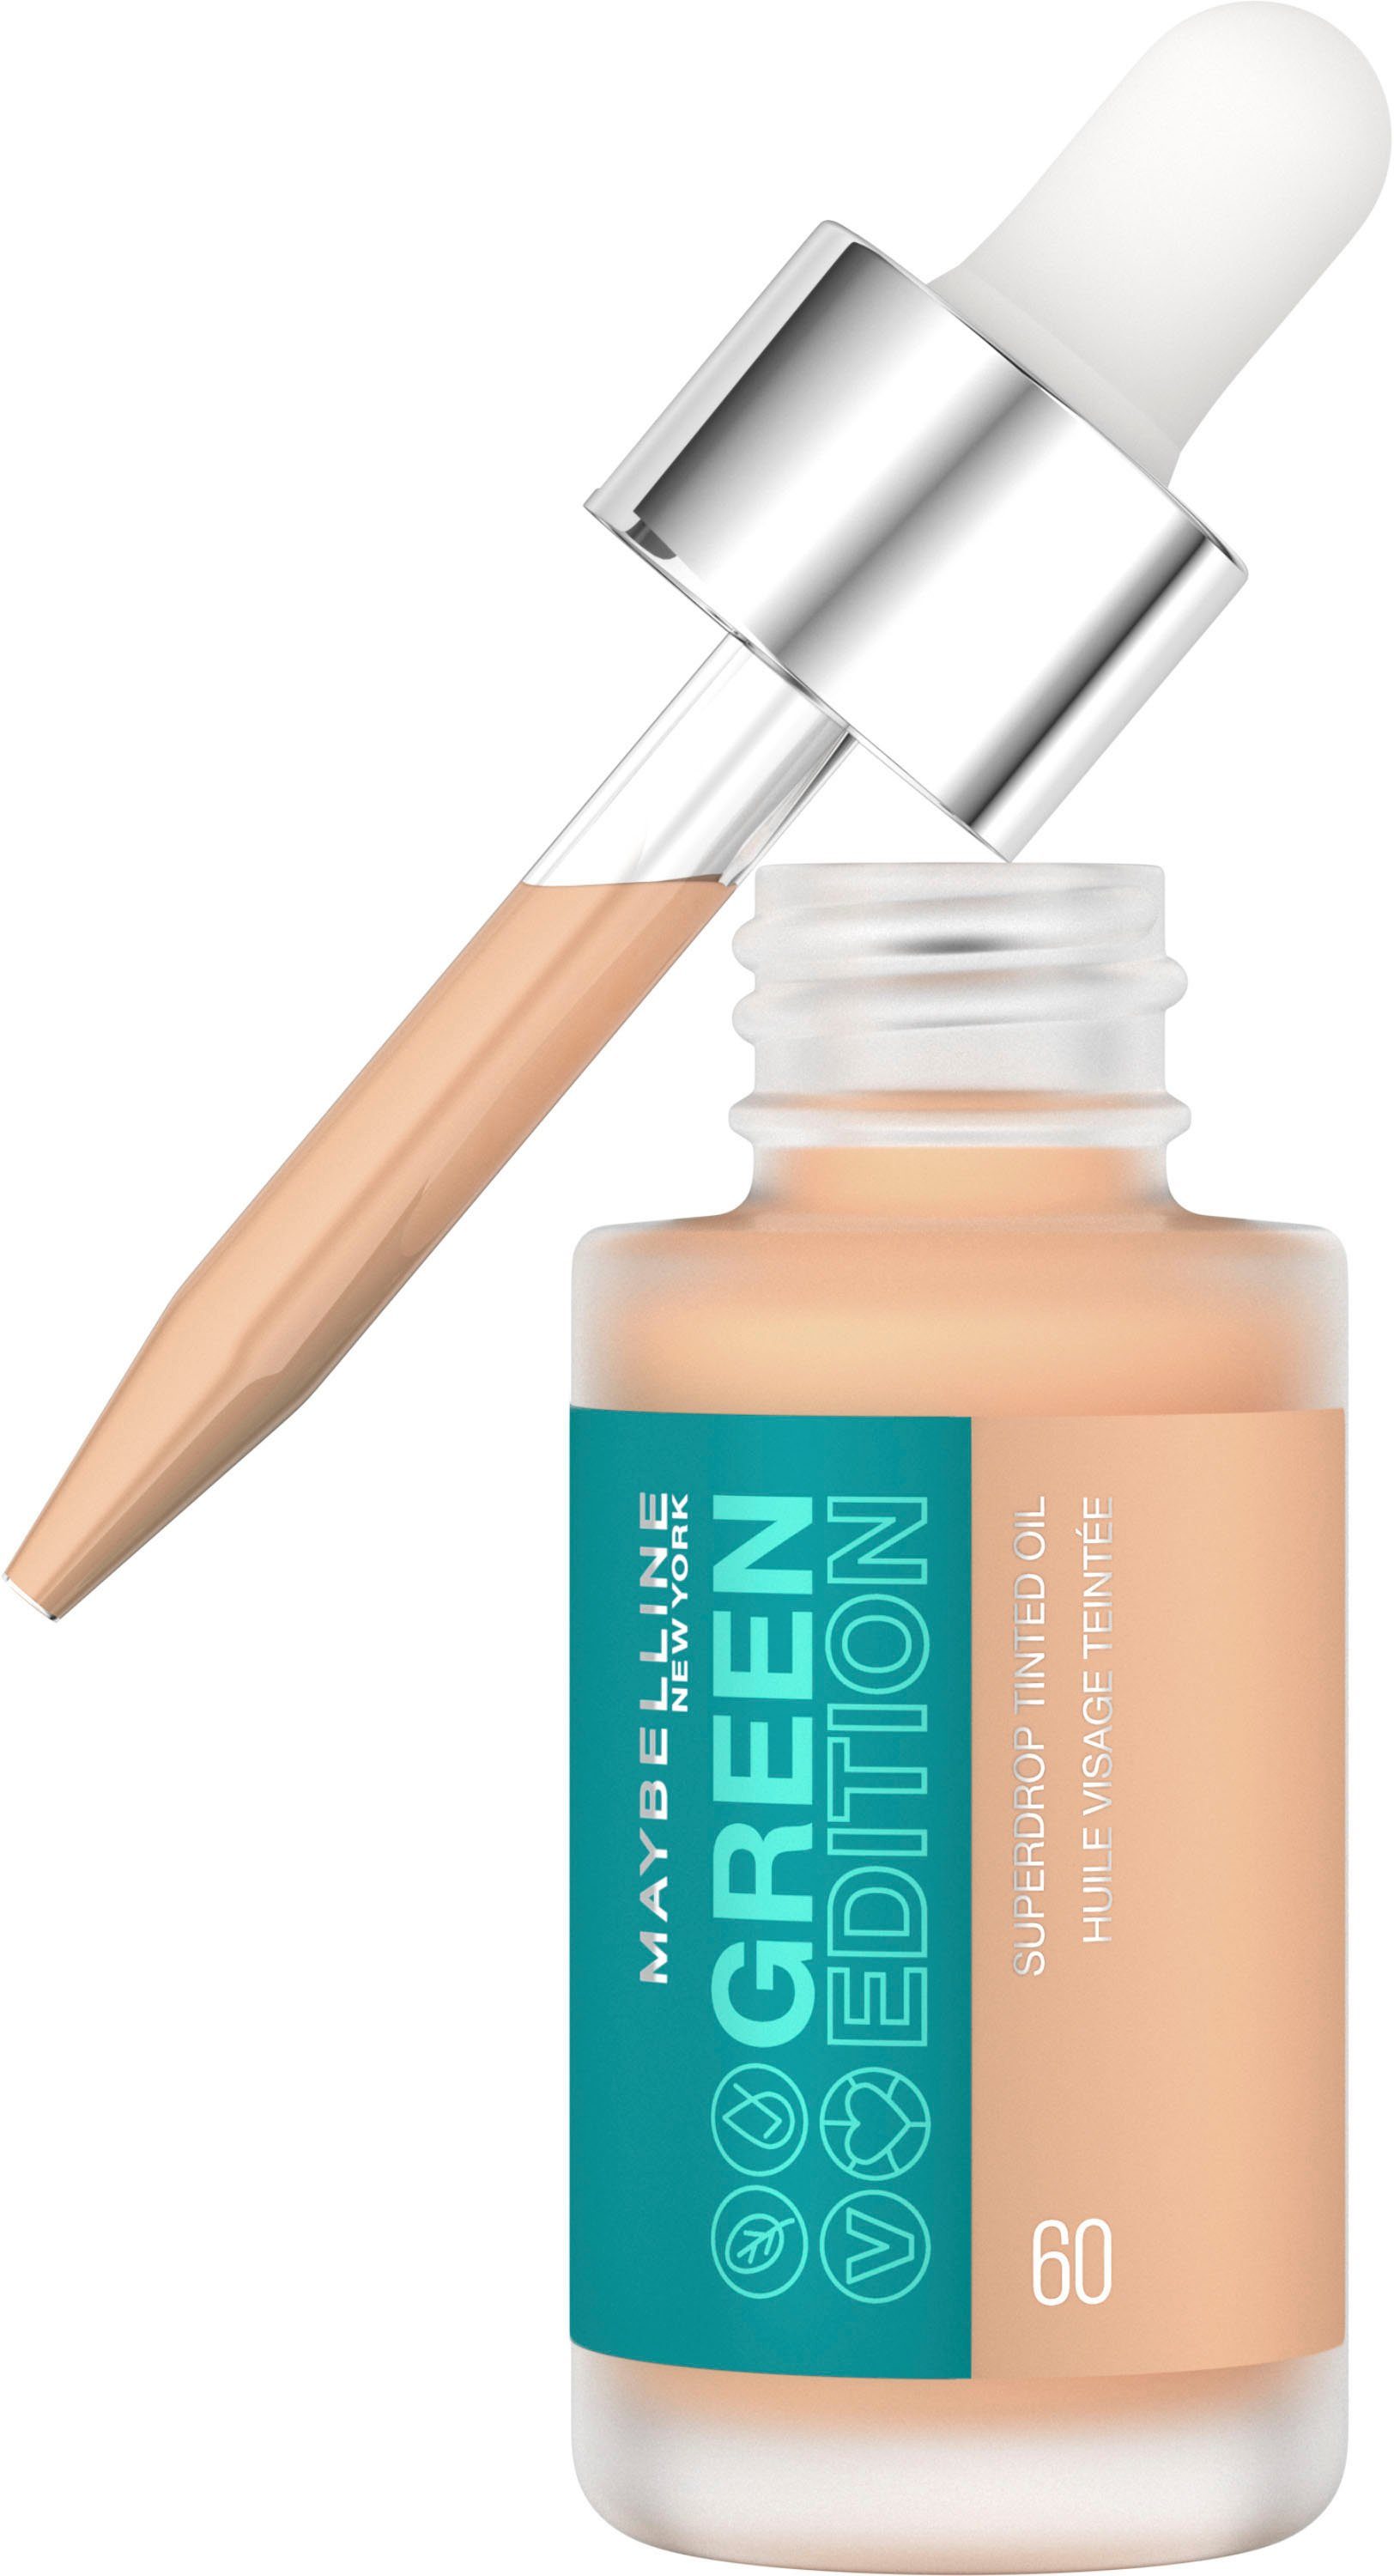 Dry TINT DRY OIL Oil Tinted ED NEW 60 GREEN MAYBELLINE Foundation Superdrop YORK